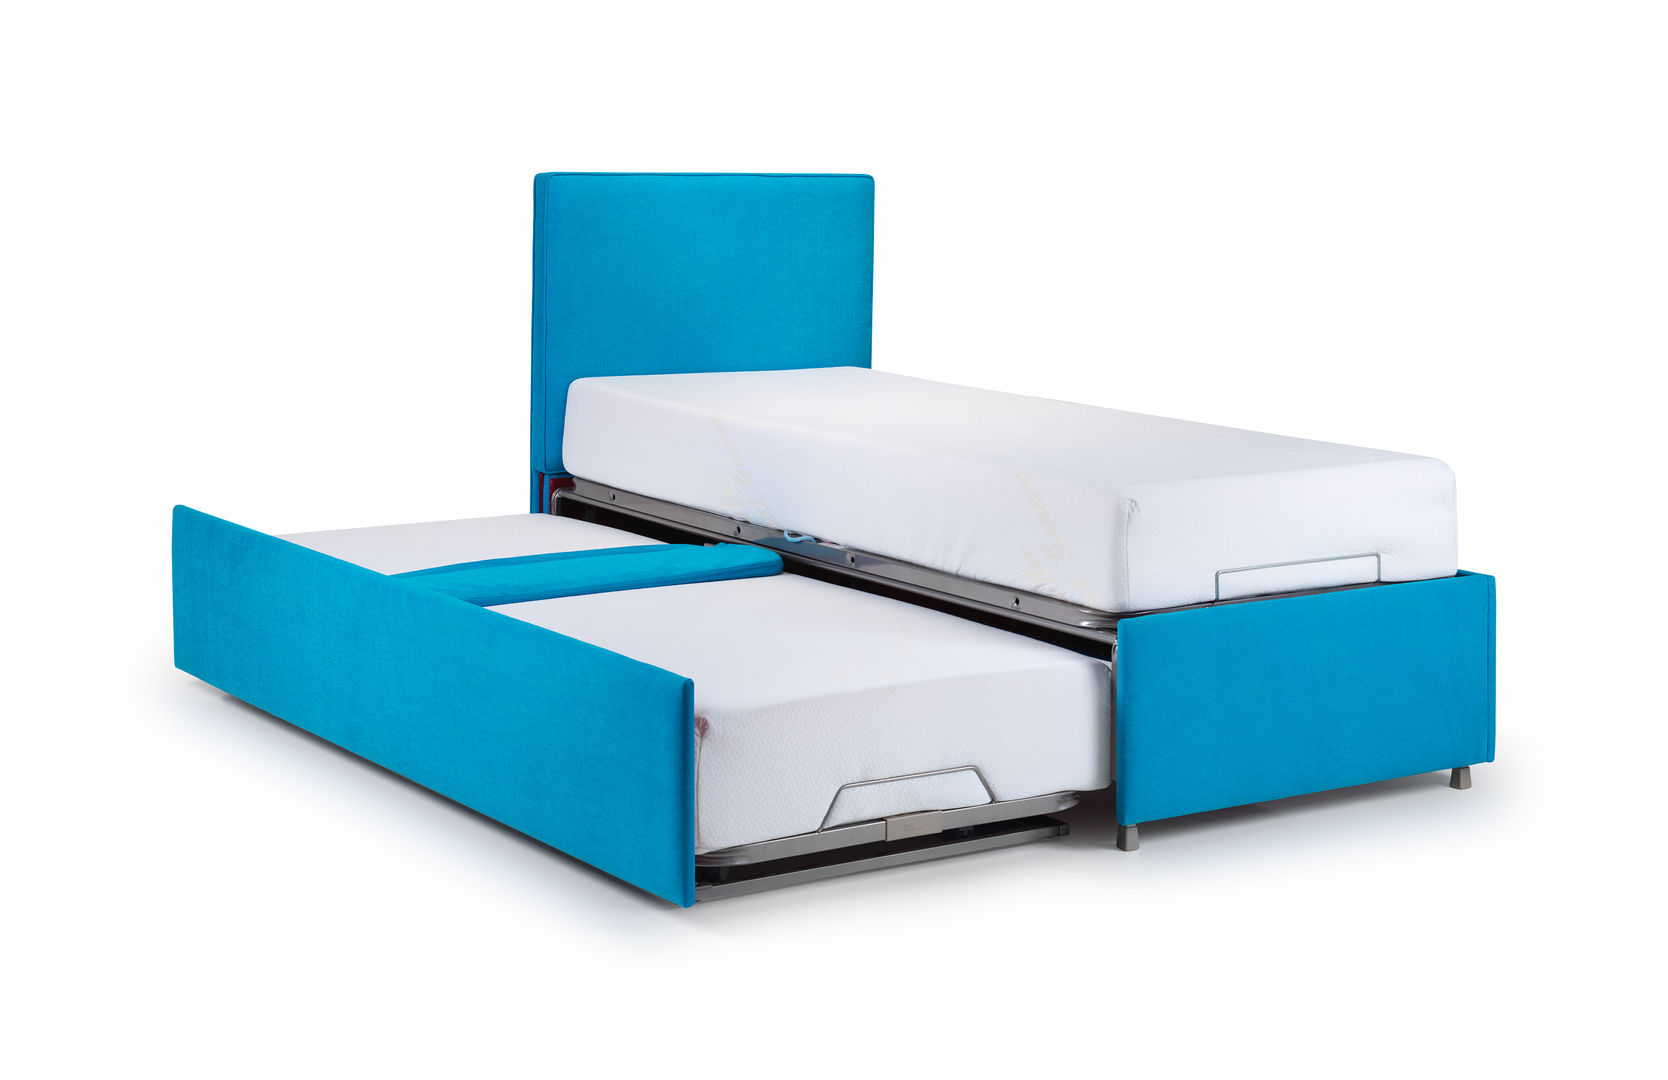 Ottoman, THE STORAGE BED THE STORAGE BED Kamar Tidur Modern Beds & headboards